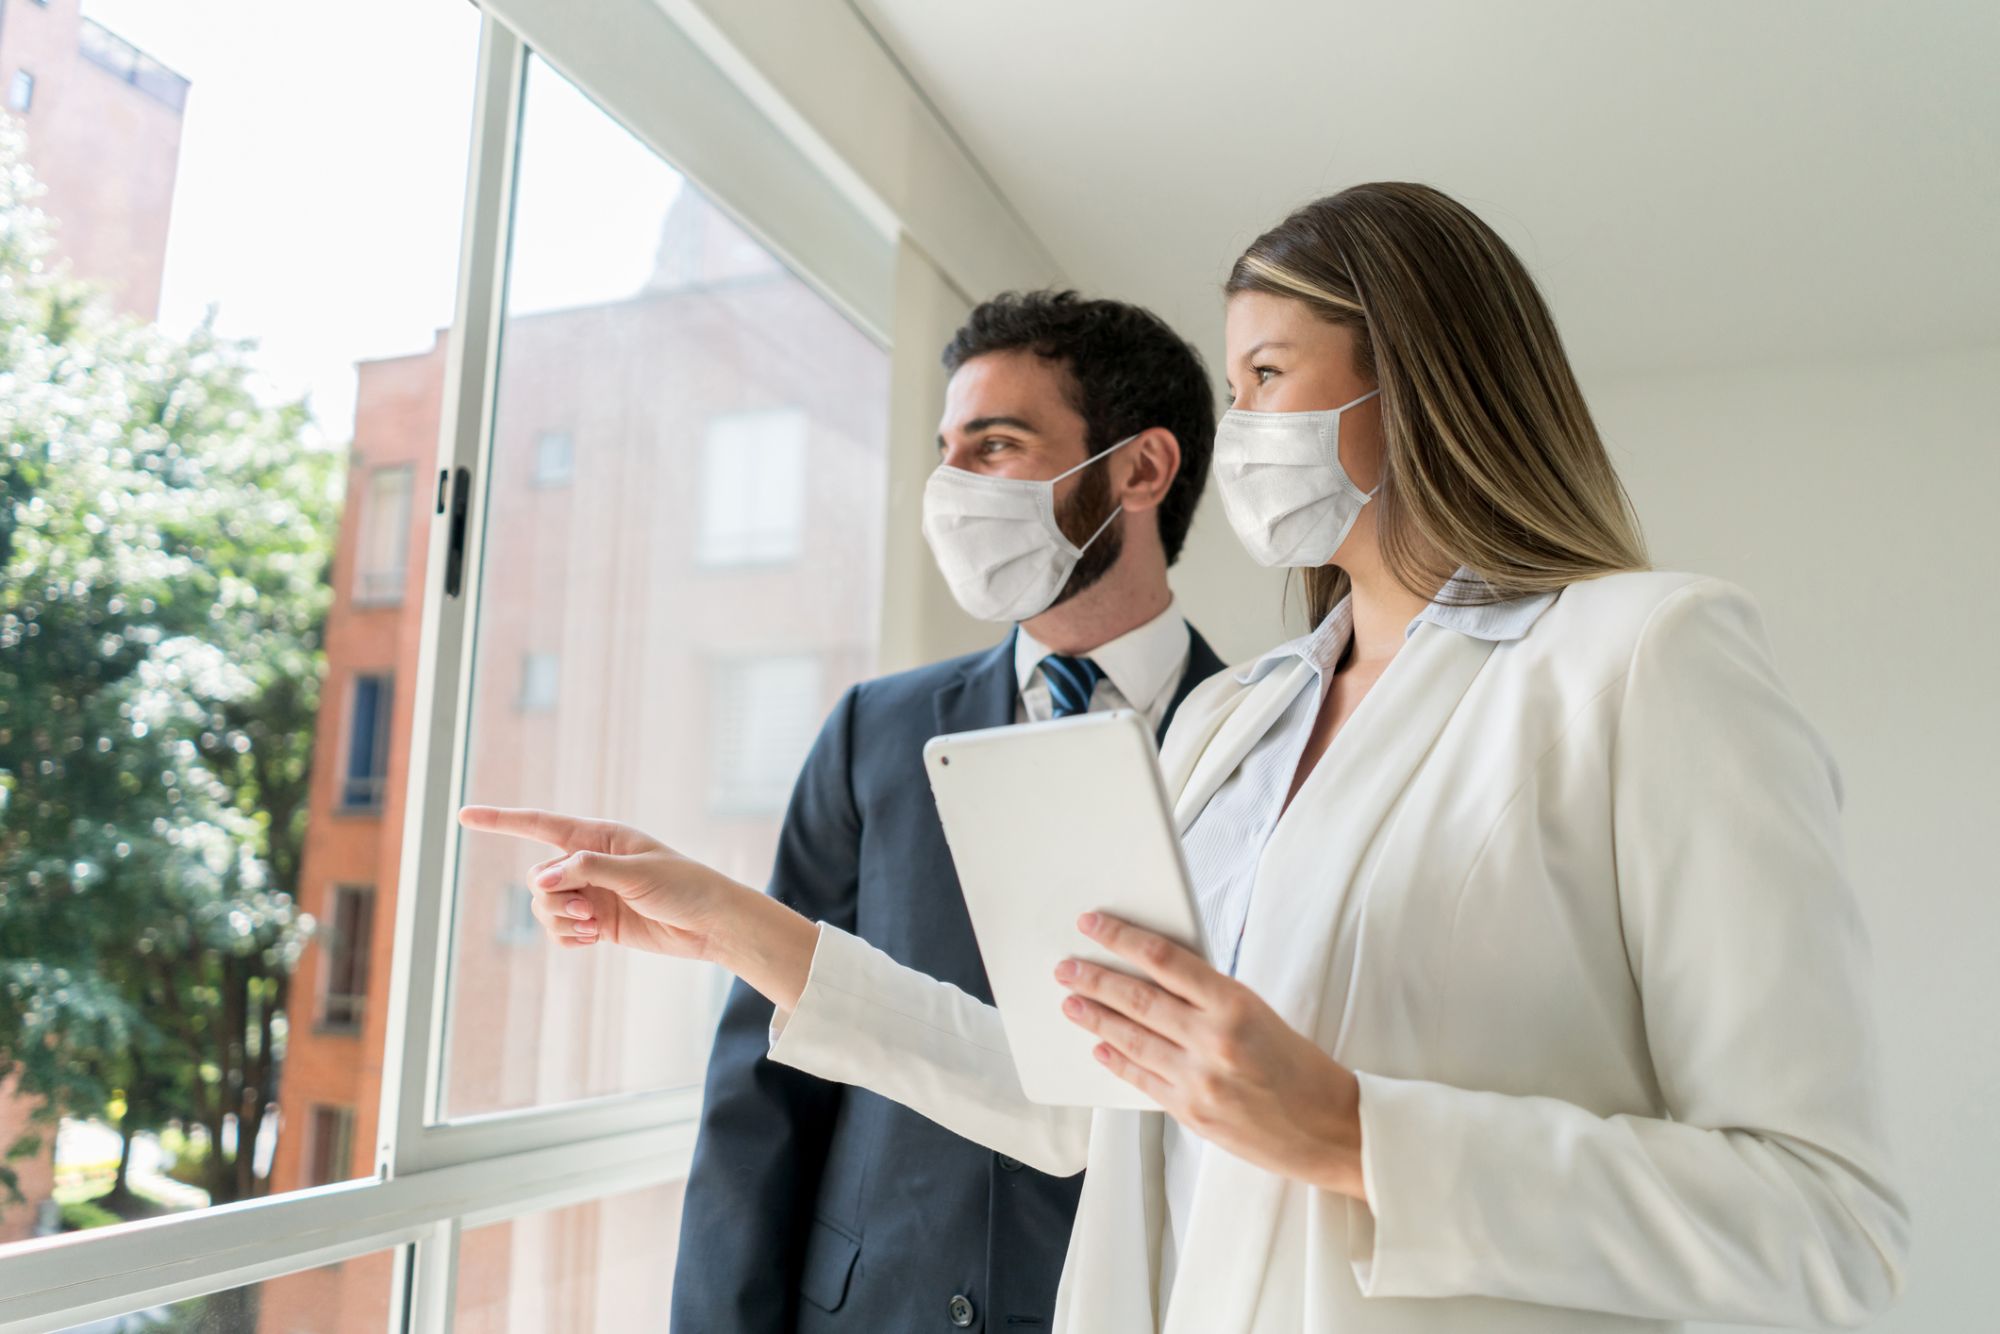 Beautiful real estate agent pointing at the view to customer both looking very cheerful but wearing protective face masks - Coronavirus concepts